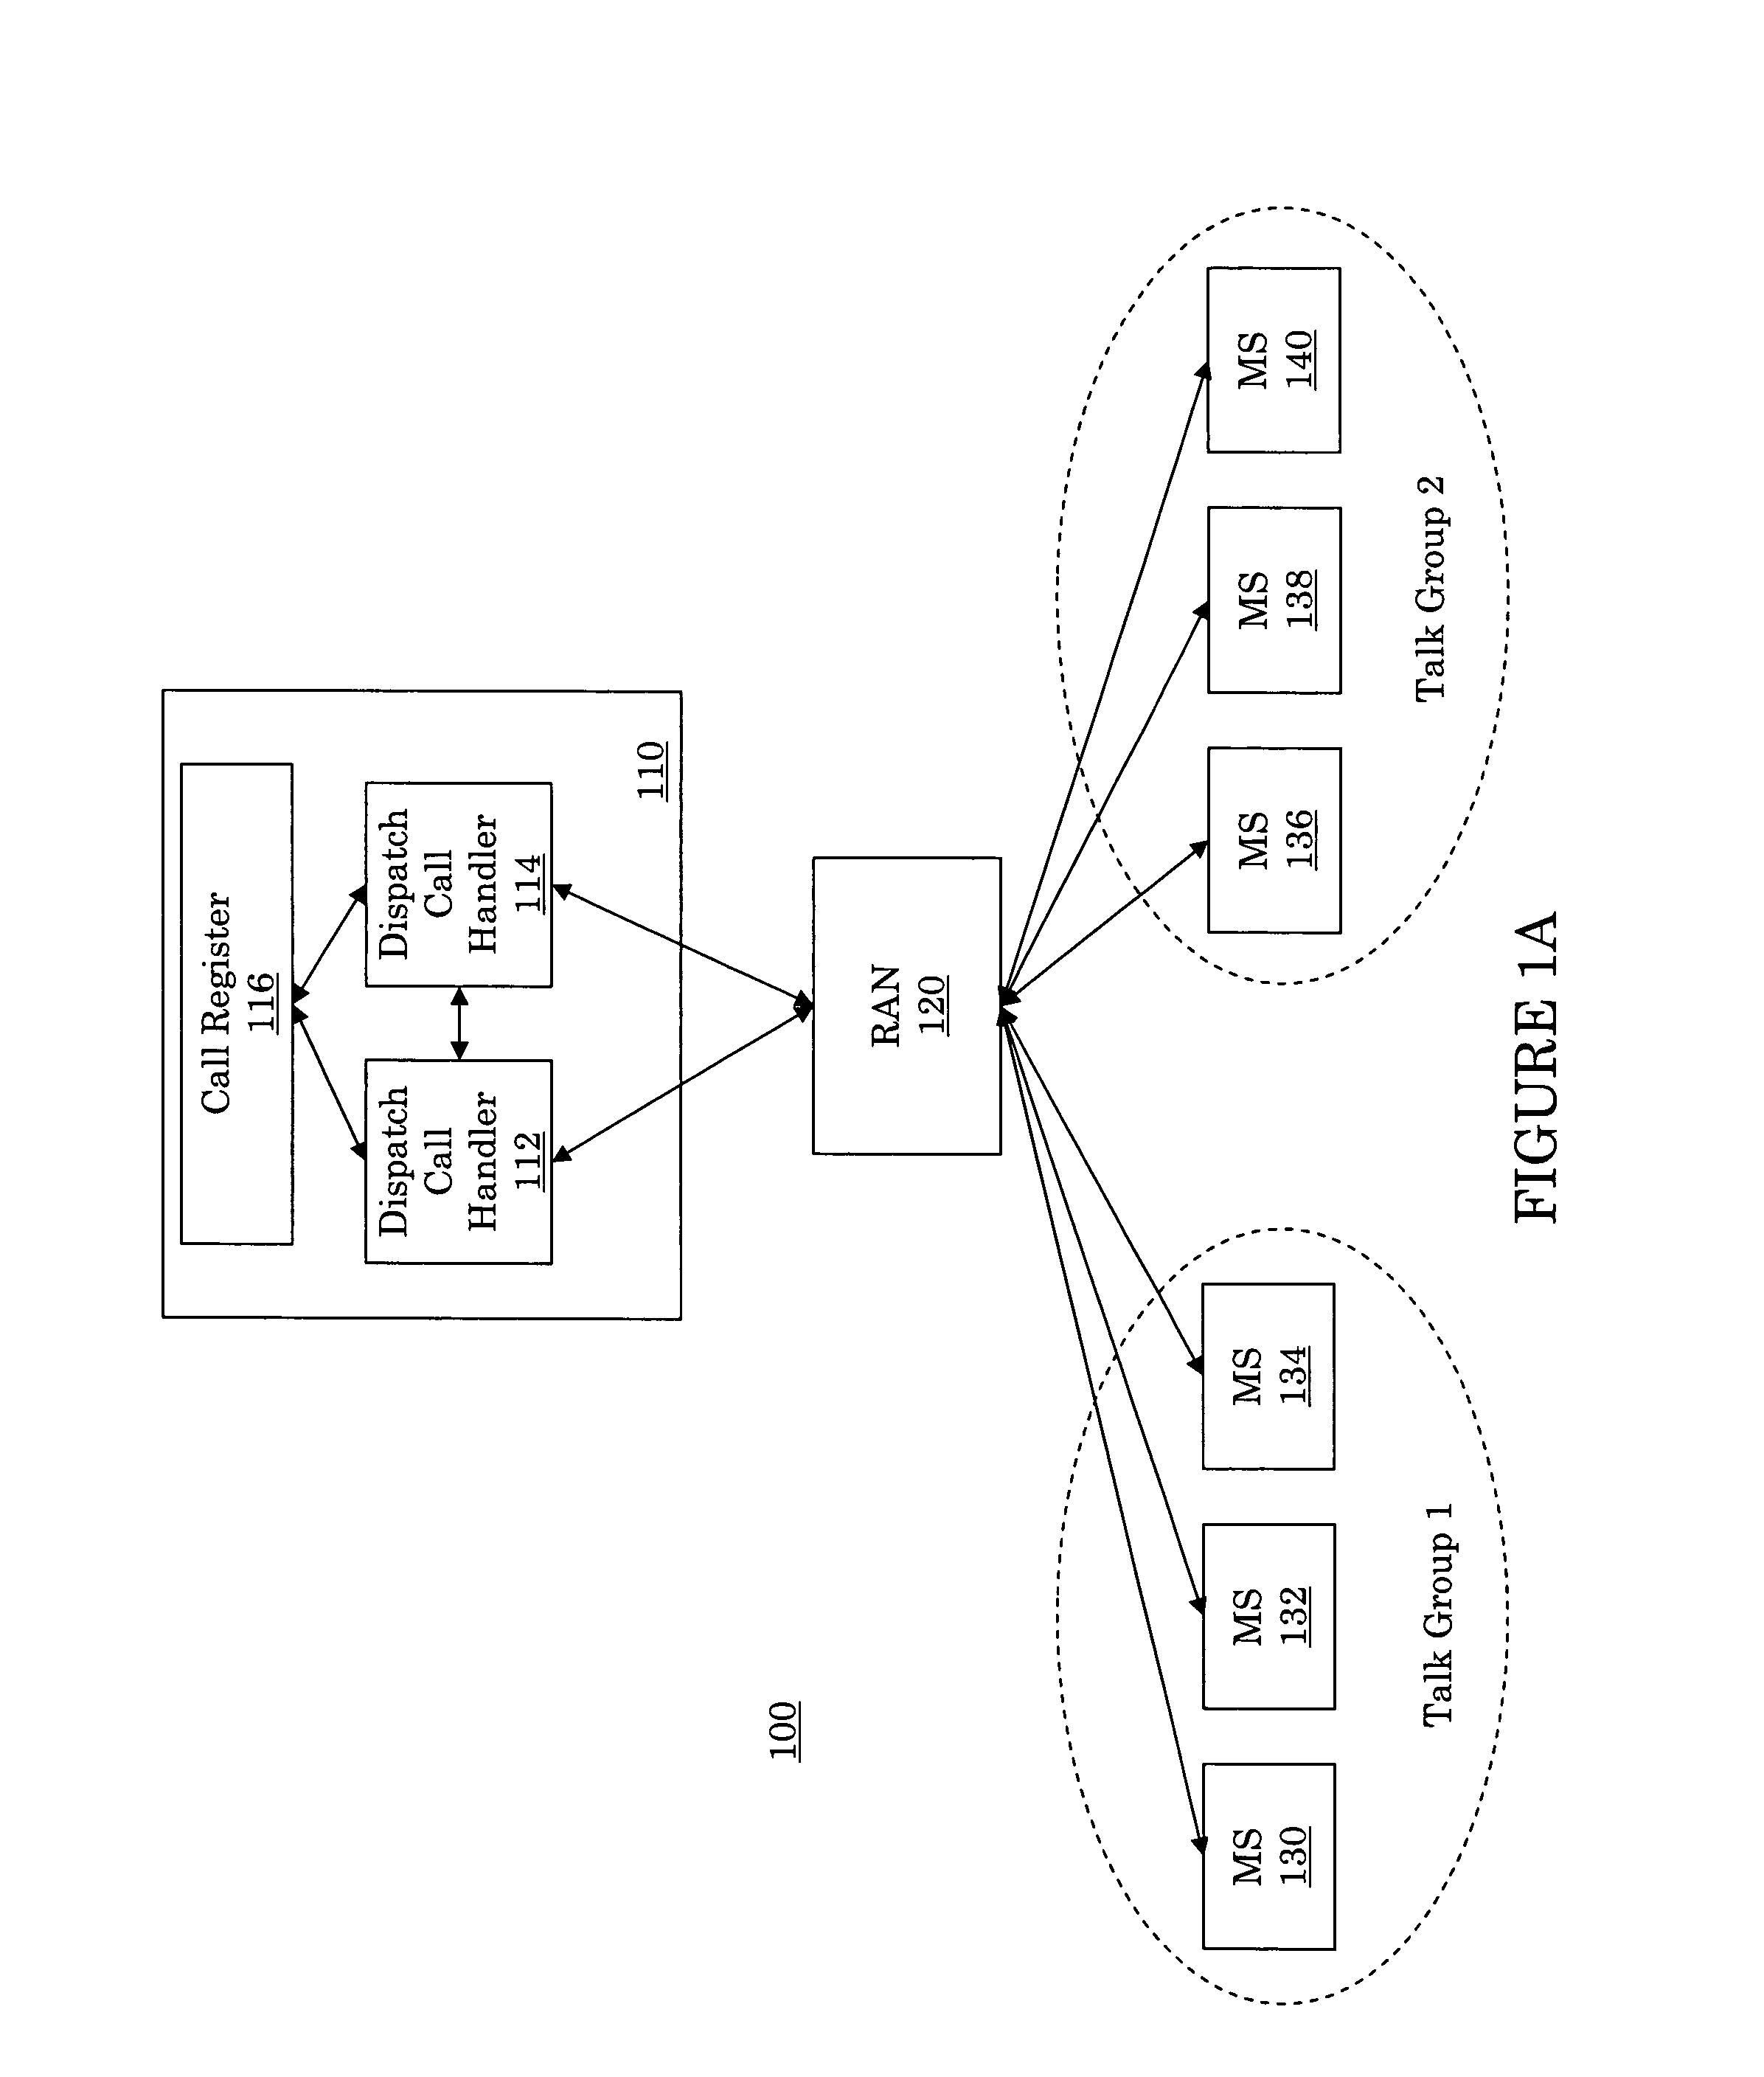 Systems and methods for merging active talk groups